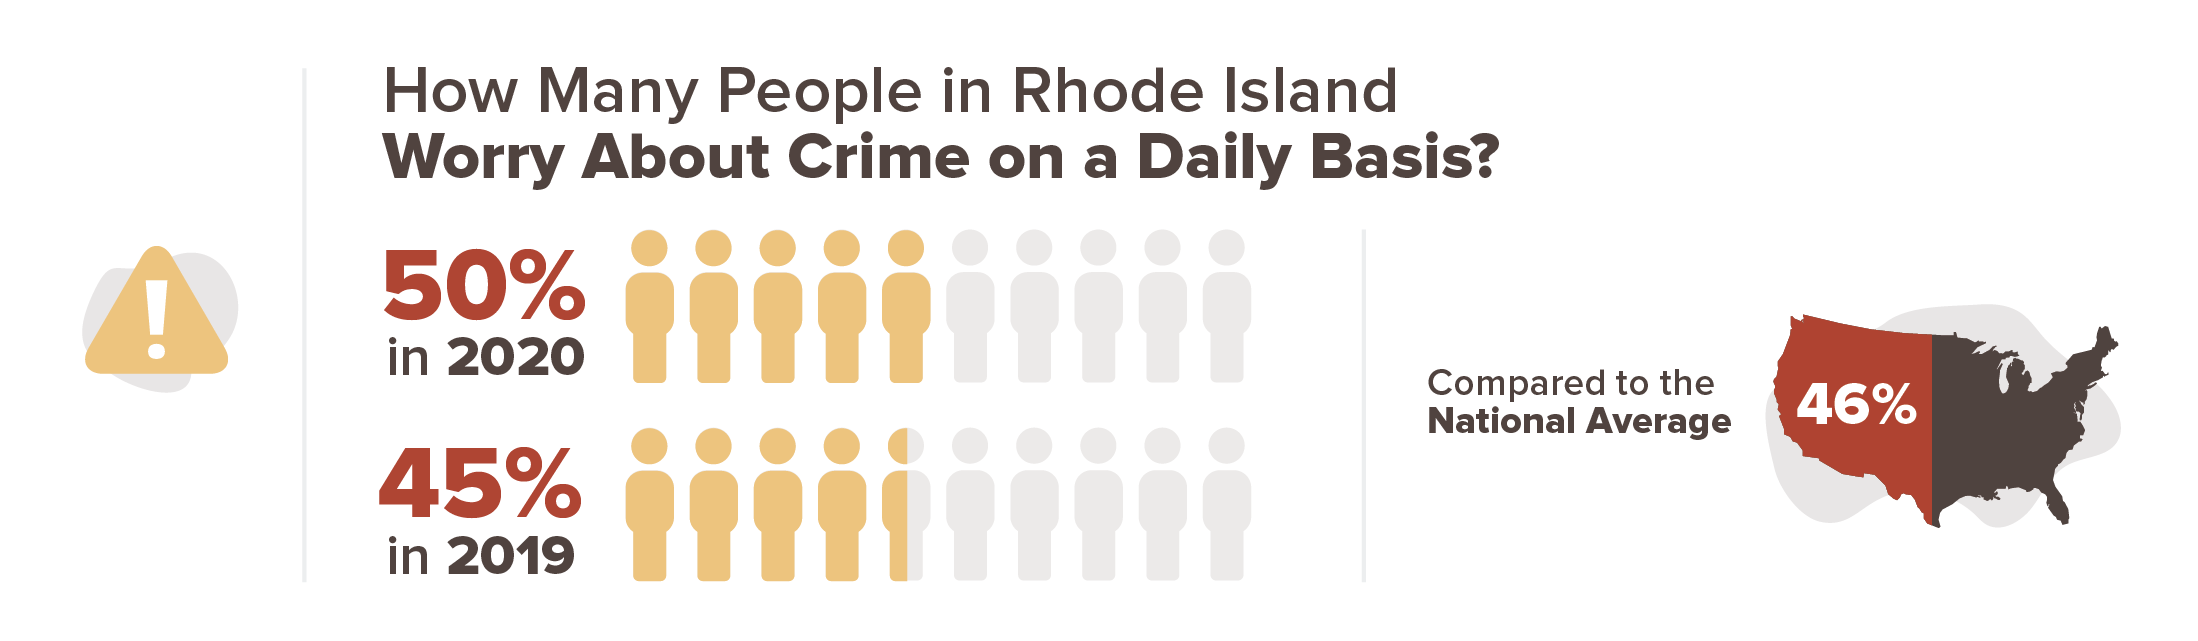 Rhode Island crime stats infographic